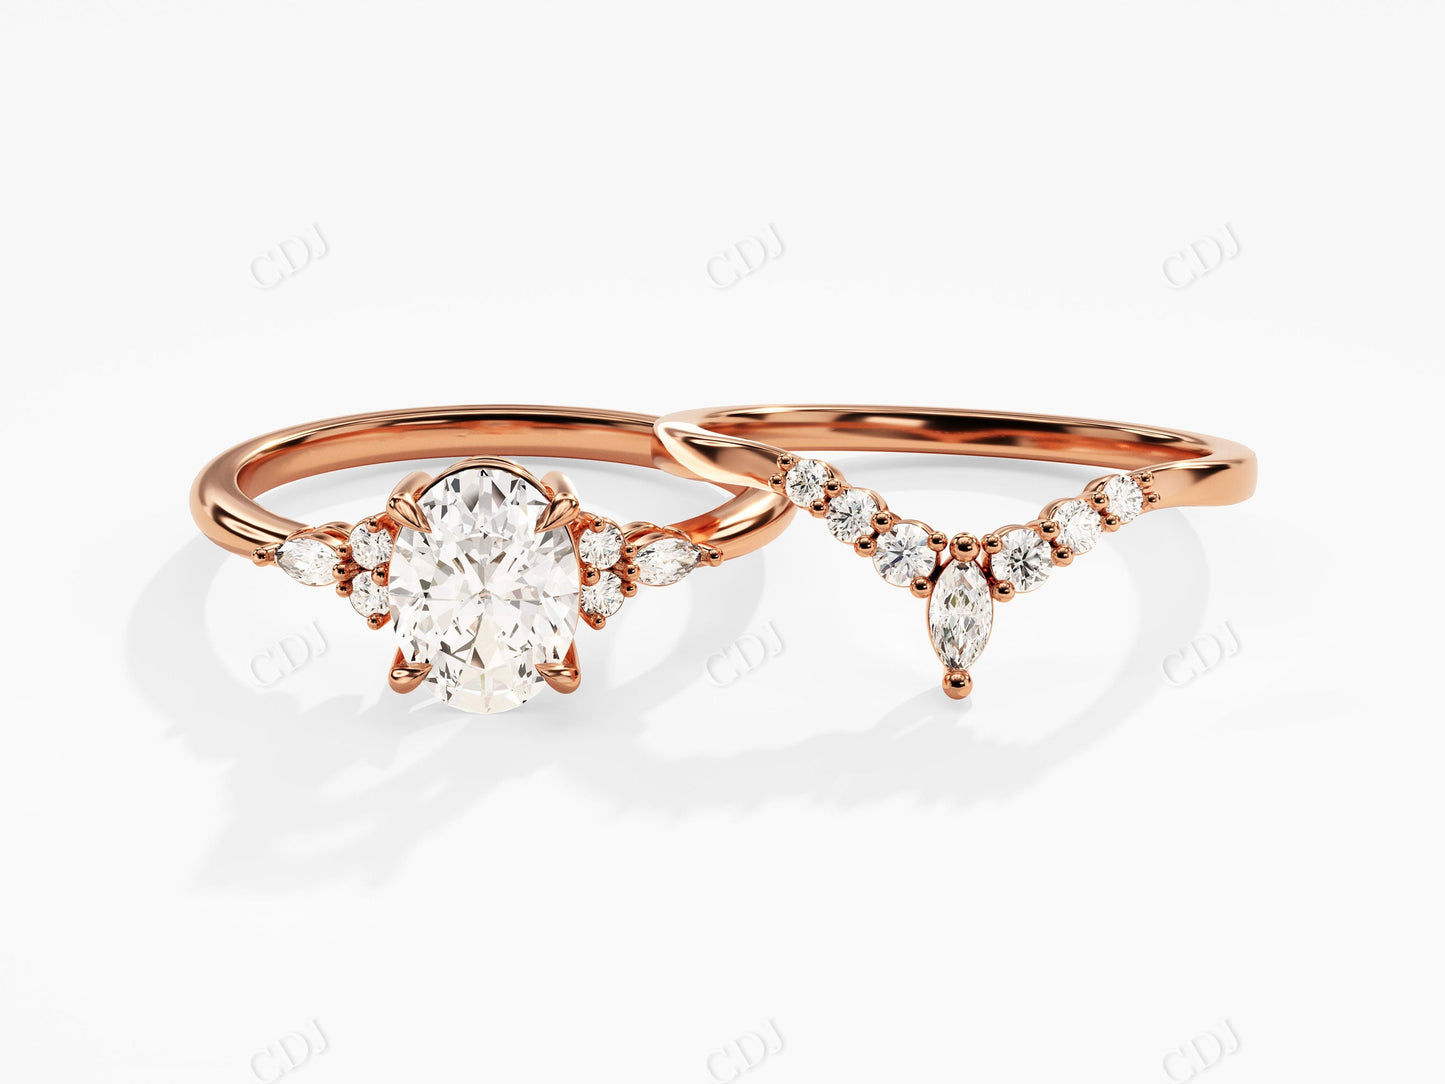 Oval Moissanite Art Deco Ring and Curved Cluster Wedding Band Set